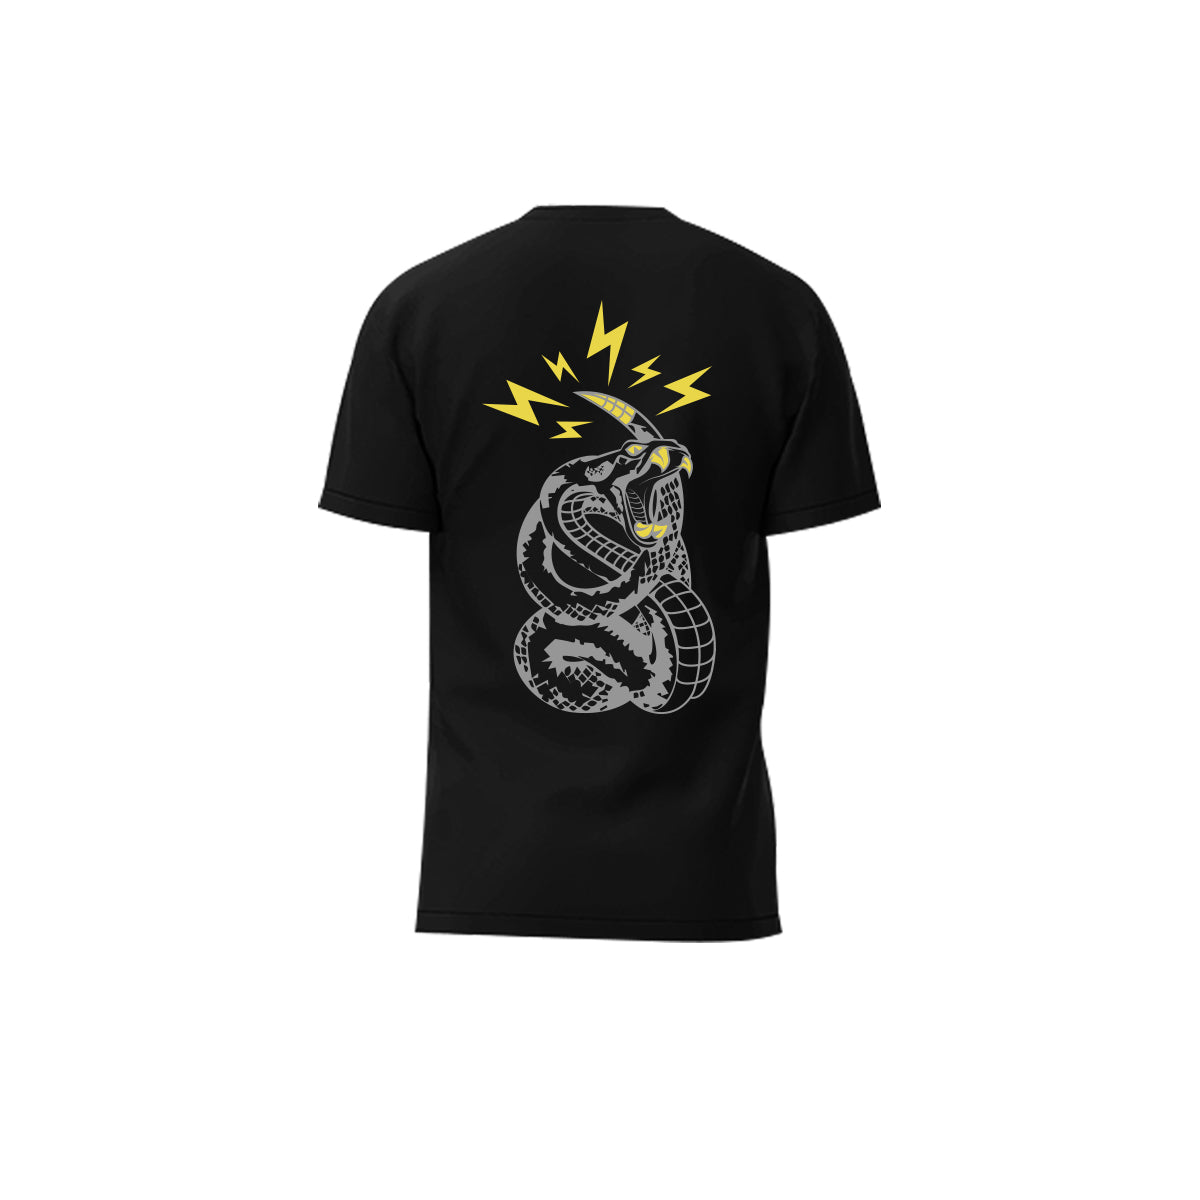 Classic 1 - Cascabel Grip and Lighting - T-Shirt